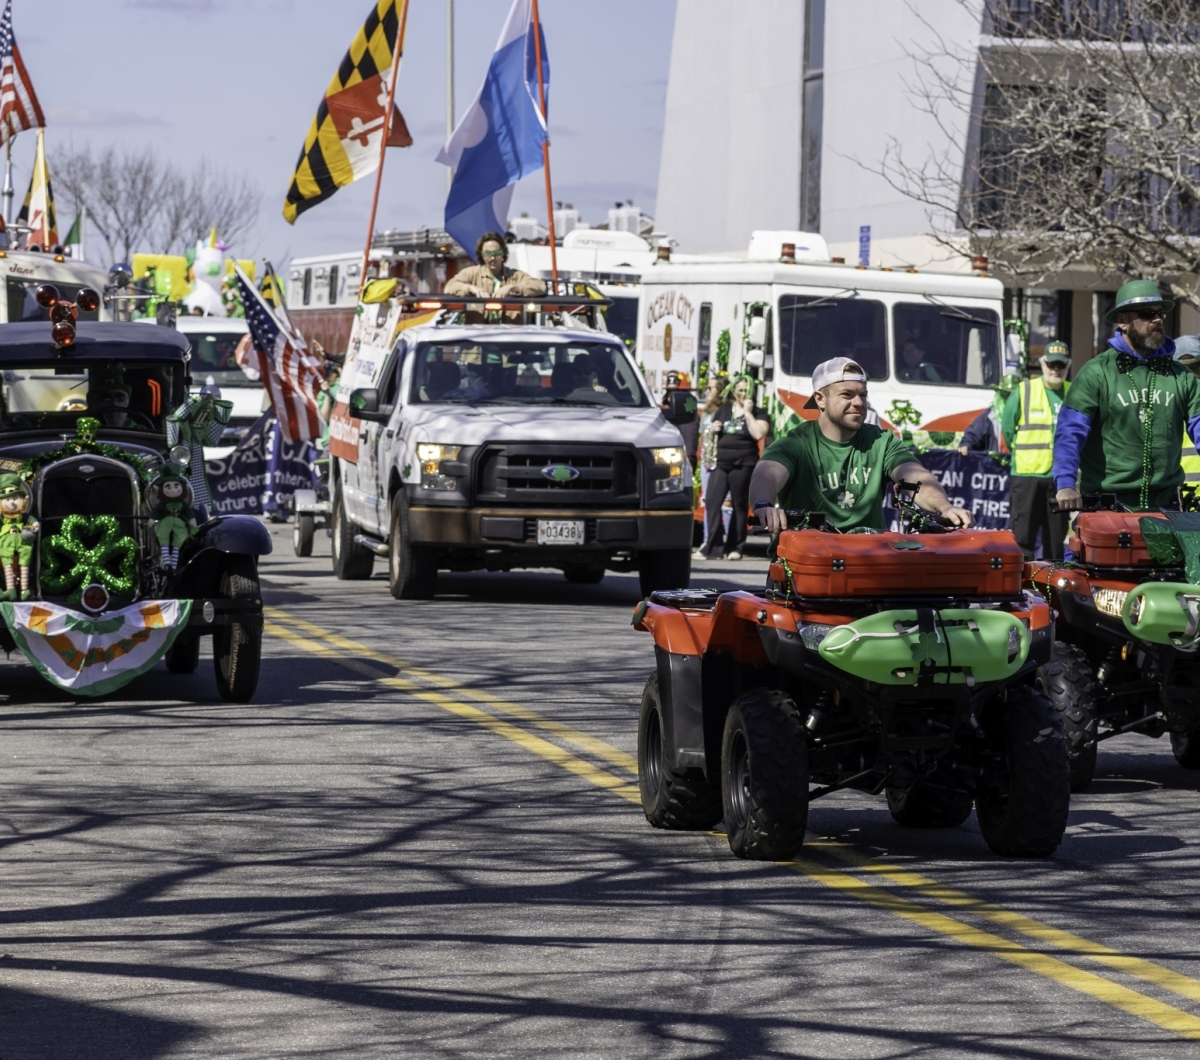 Beach patrol 4 wheelers in the St. Patrick's Day parade